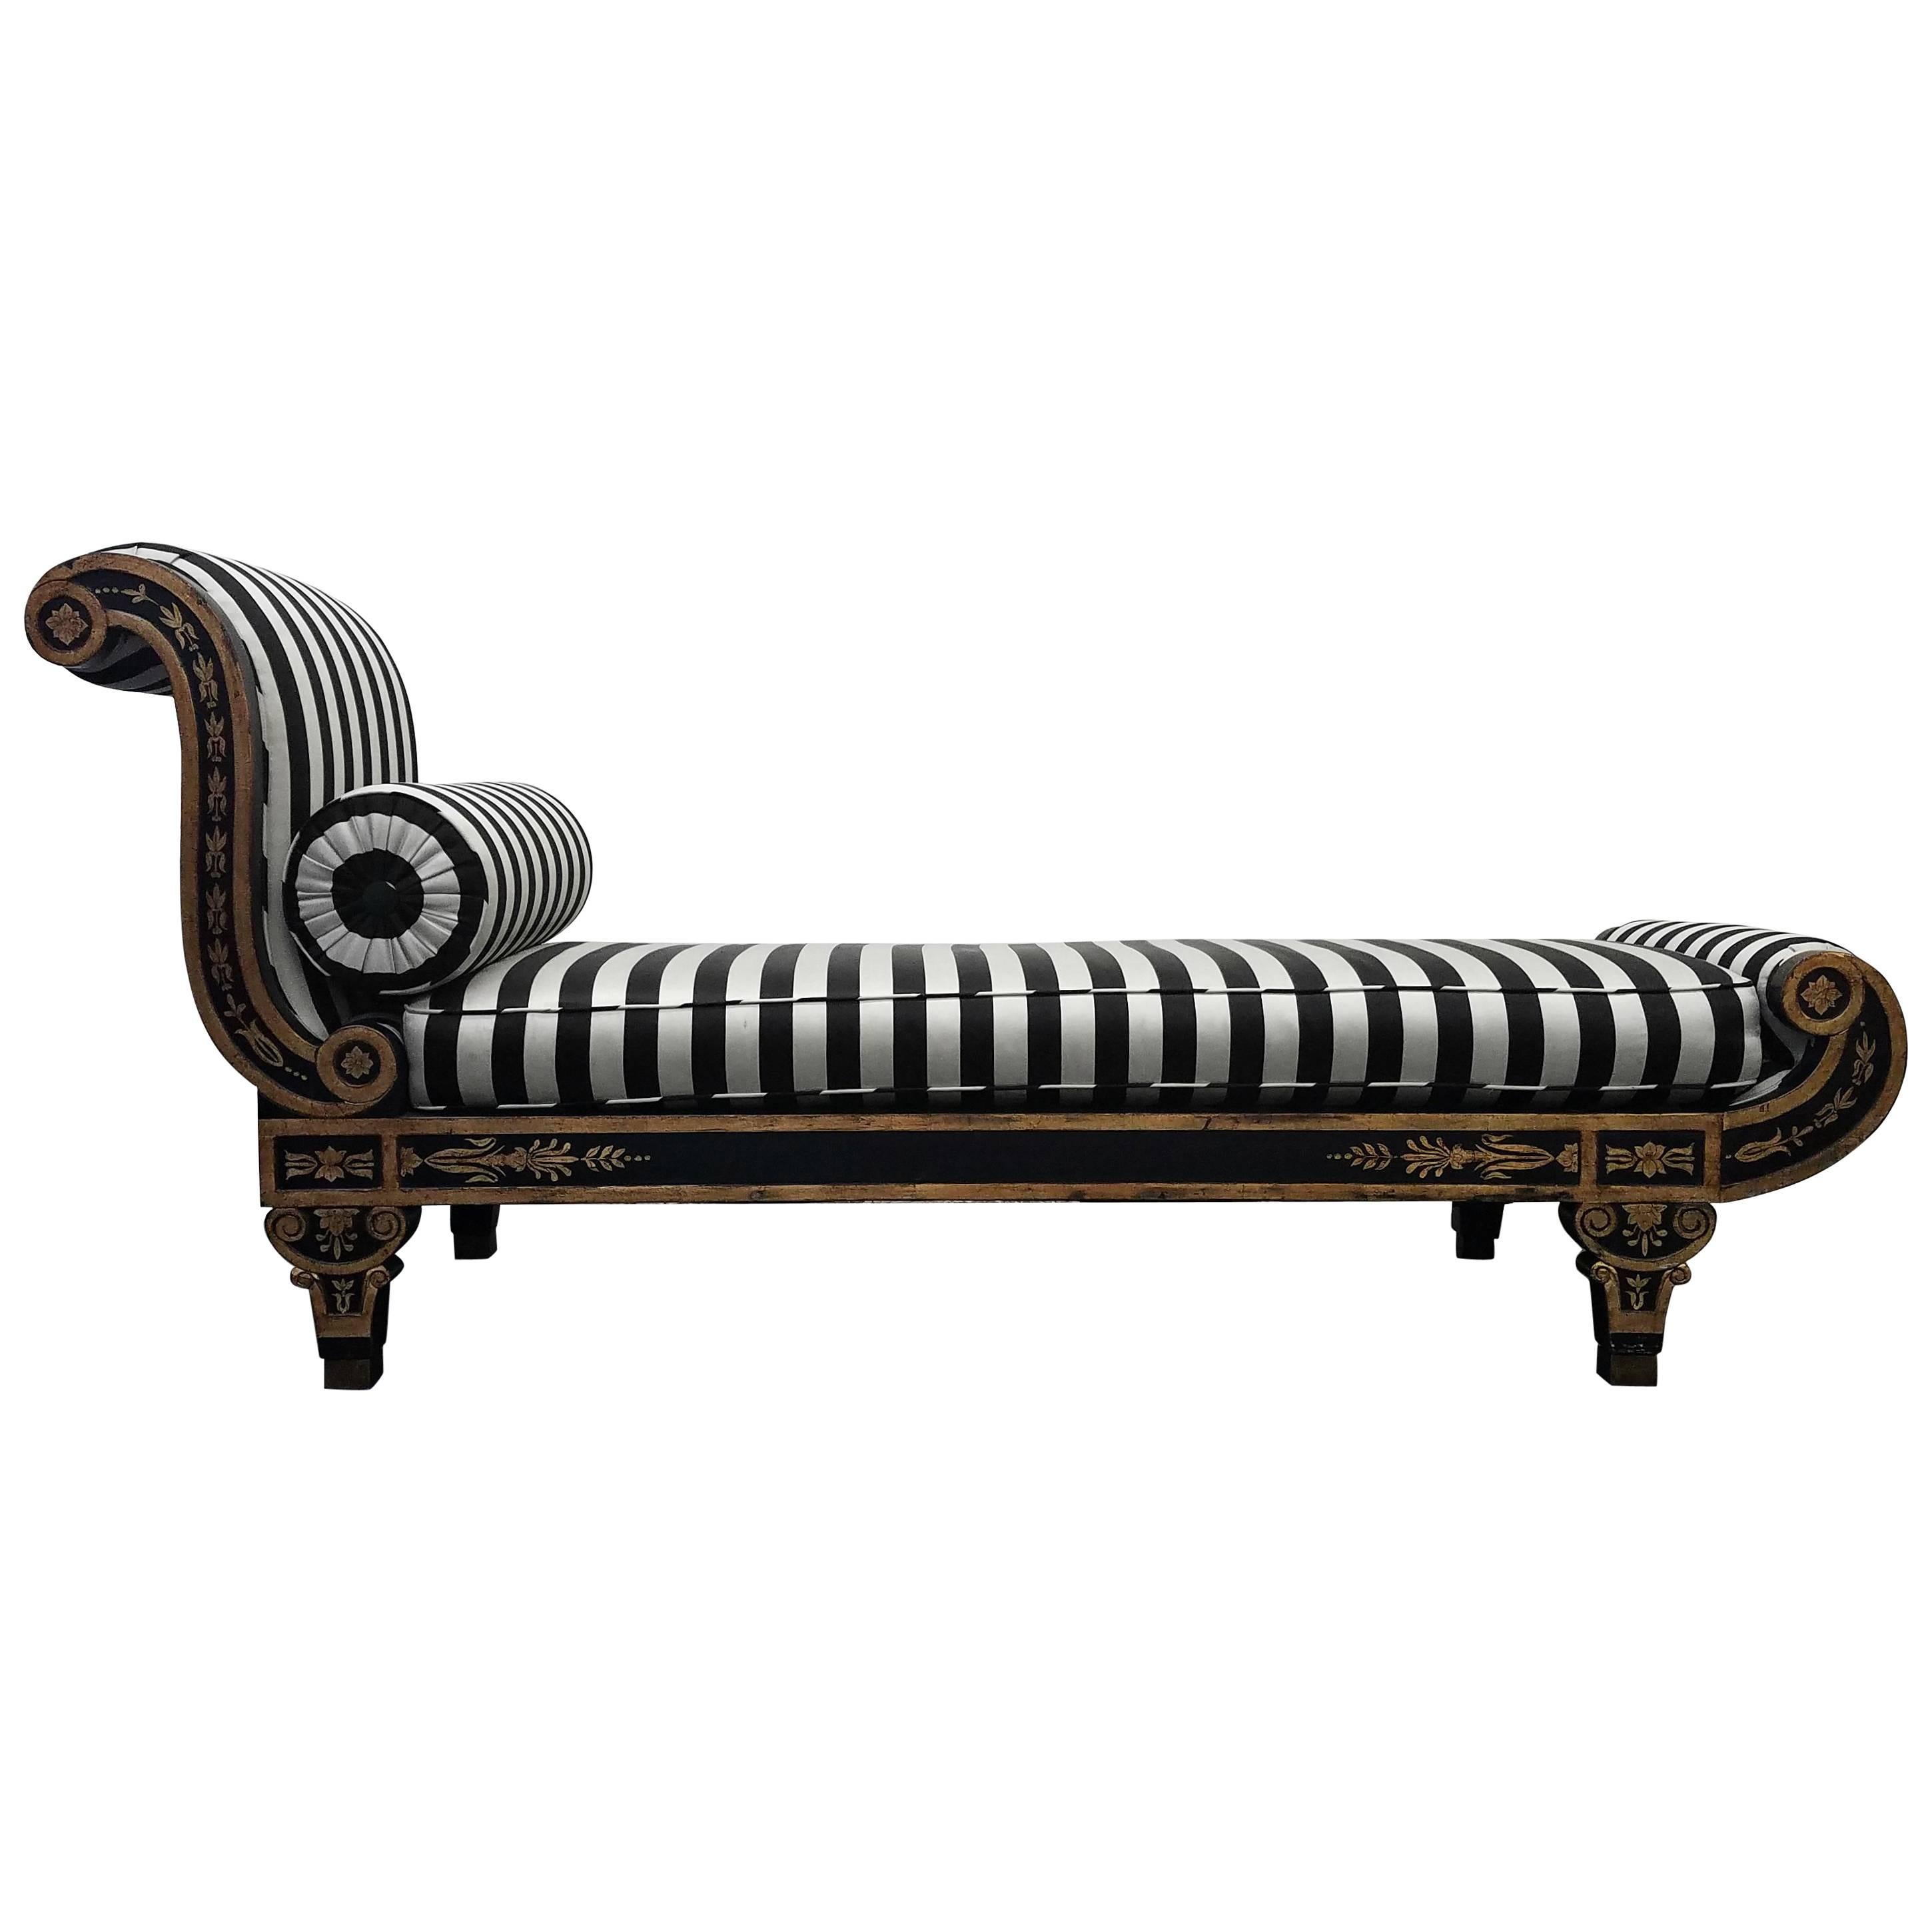 Vintage Regency Style Cleopatra Chaise Lounge Chair